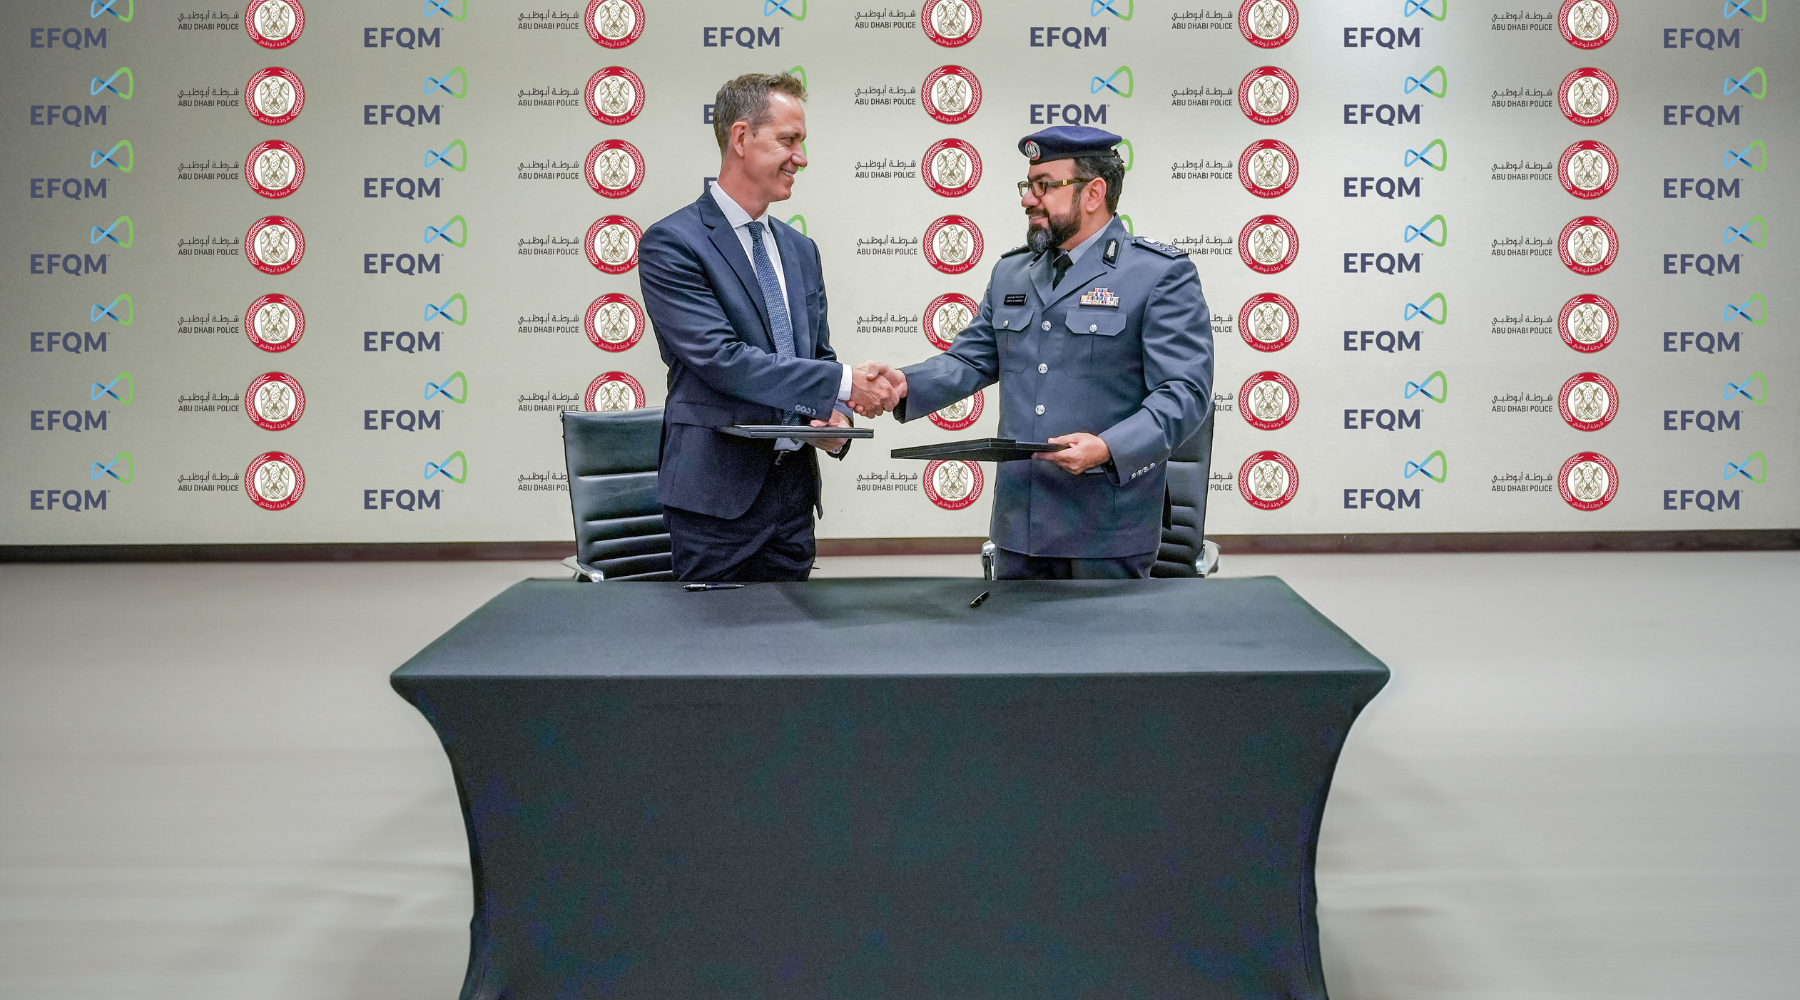 In Partnership with Abu Dhabi Police: EFQM to Host the Second Edition of The EFQM Middle East Summit in Abu Dhabi